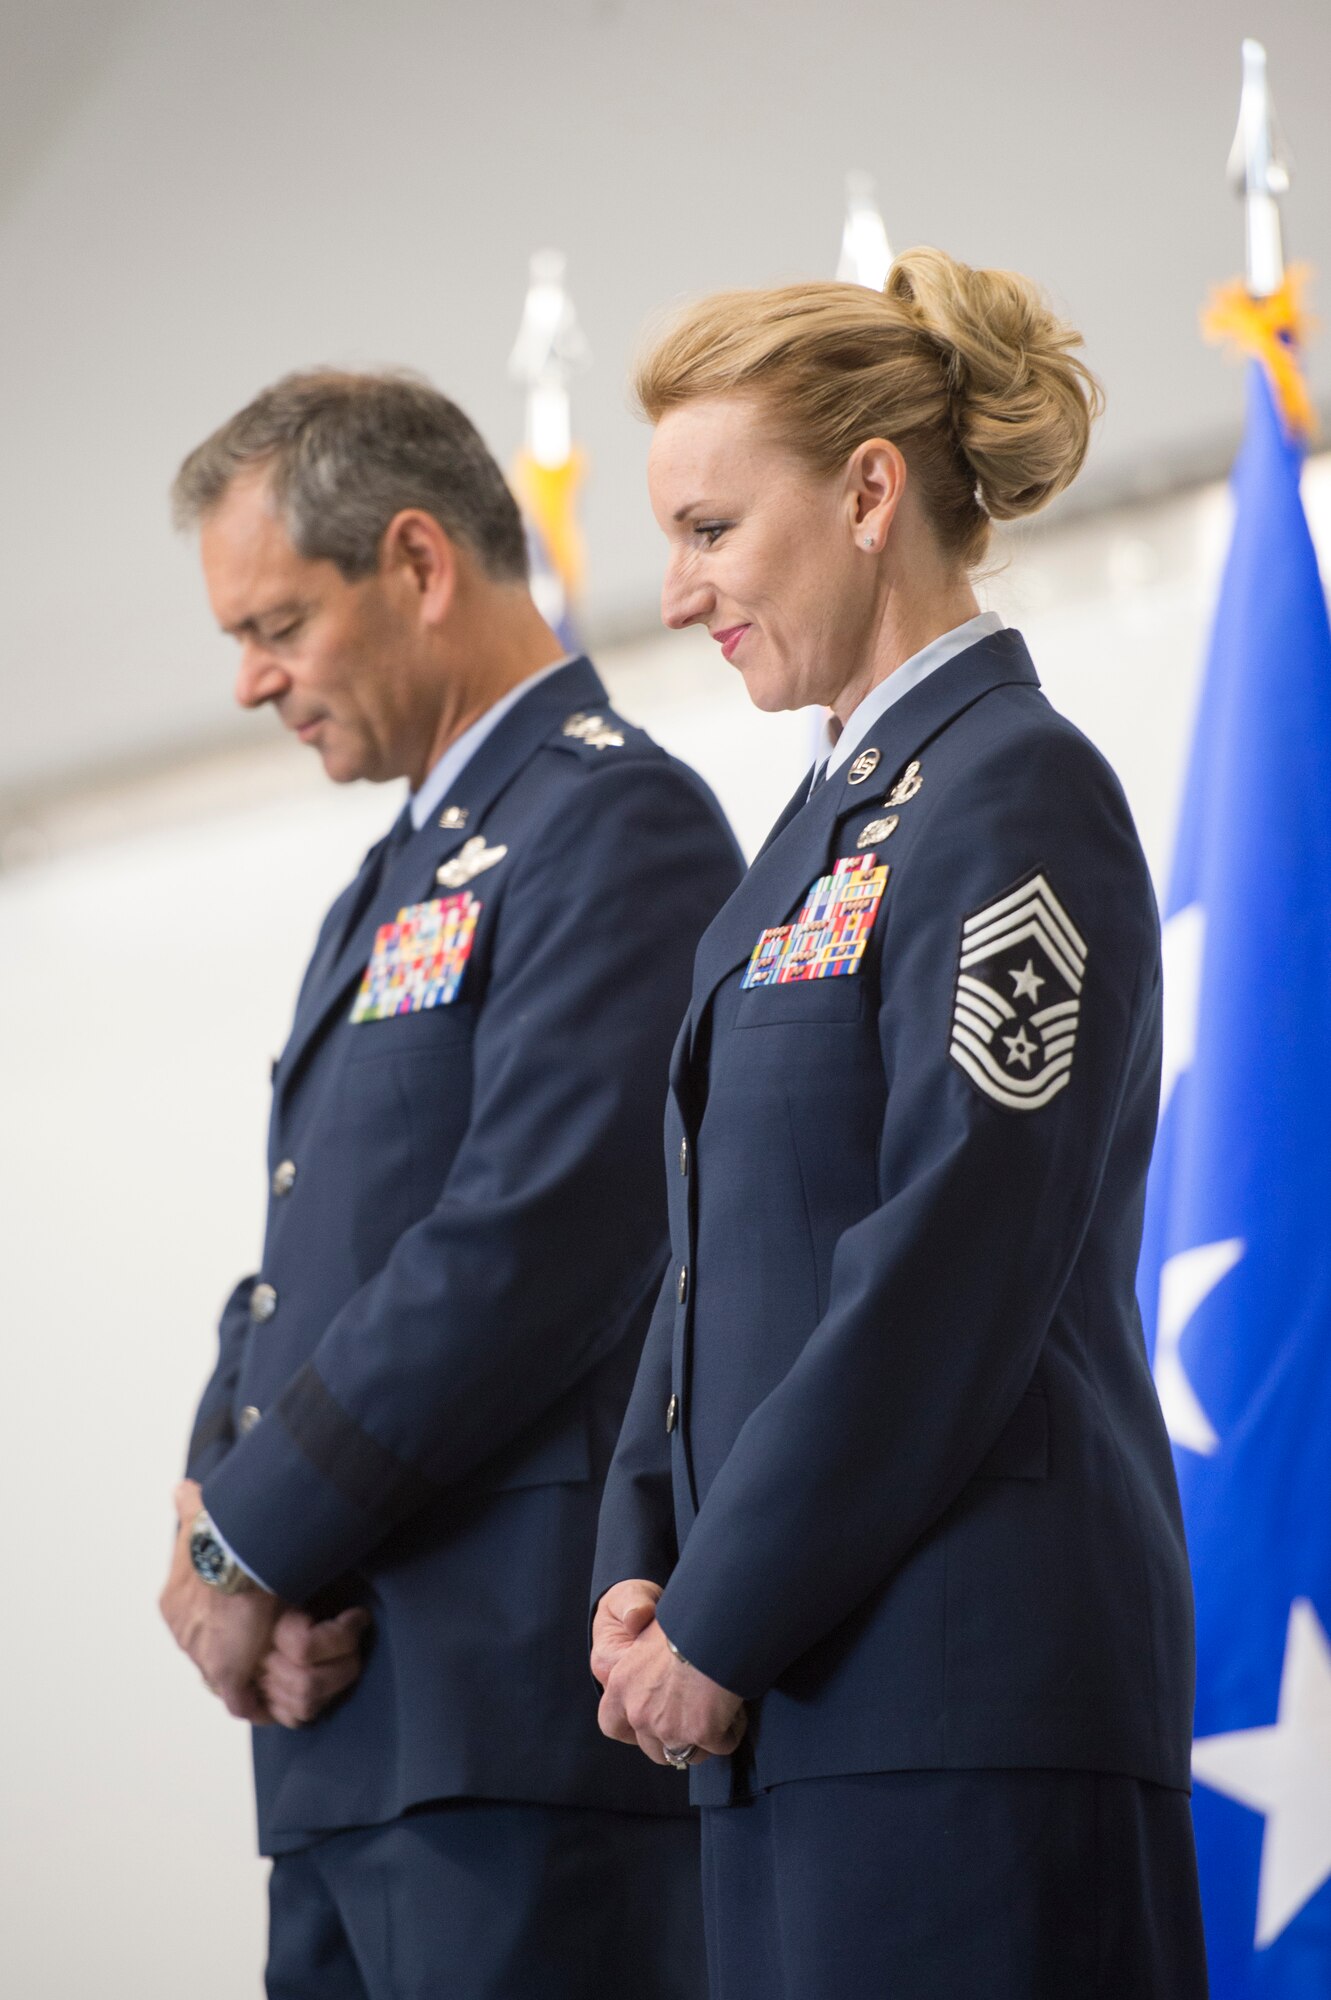 Friends, family, colleagues, and invited guests attend the retirement ceremony for Air Force Chief Master Sgt. Gay L.C. Veale, held at Hangar 1, Joint Base Elmendorf-Richardson, Alaska, July 20, 2018. Chief Veale retired after 30 years of exemplary and faithful service.